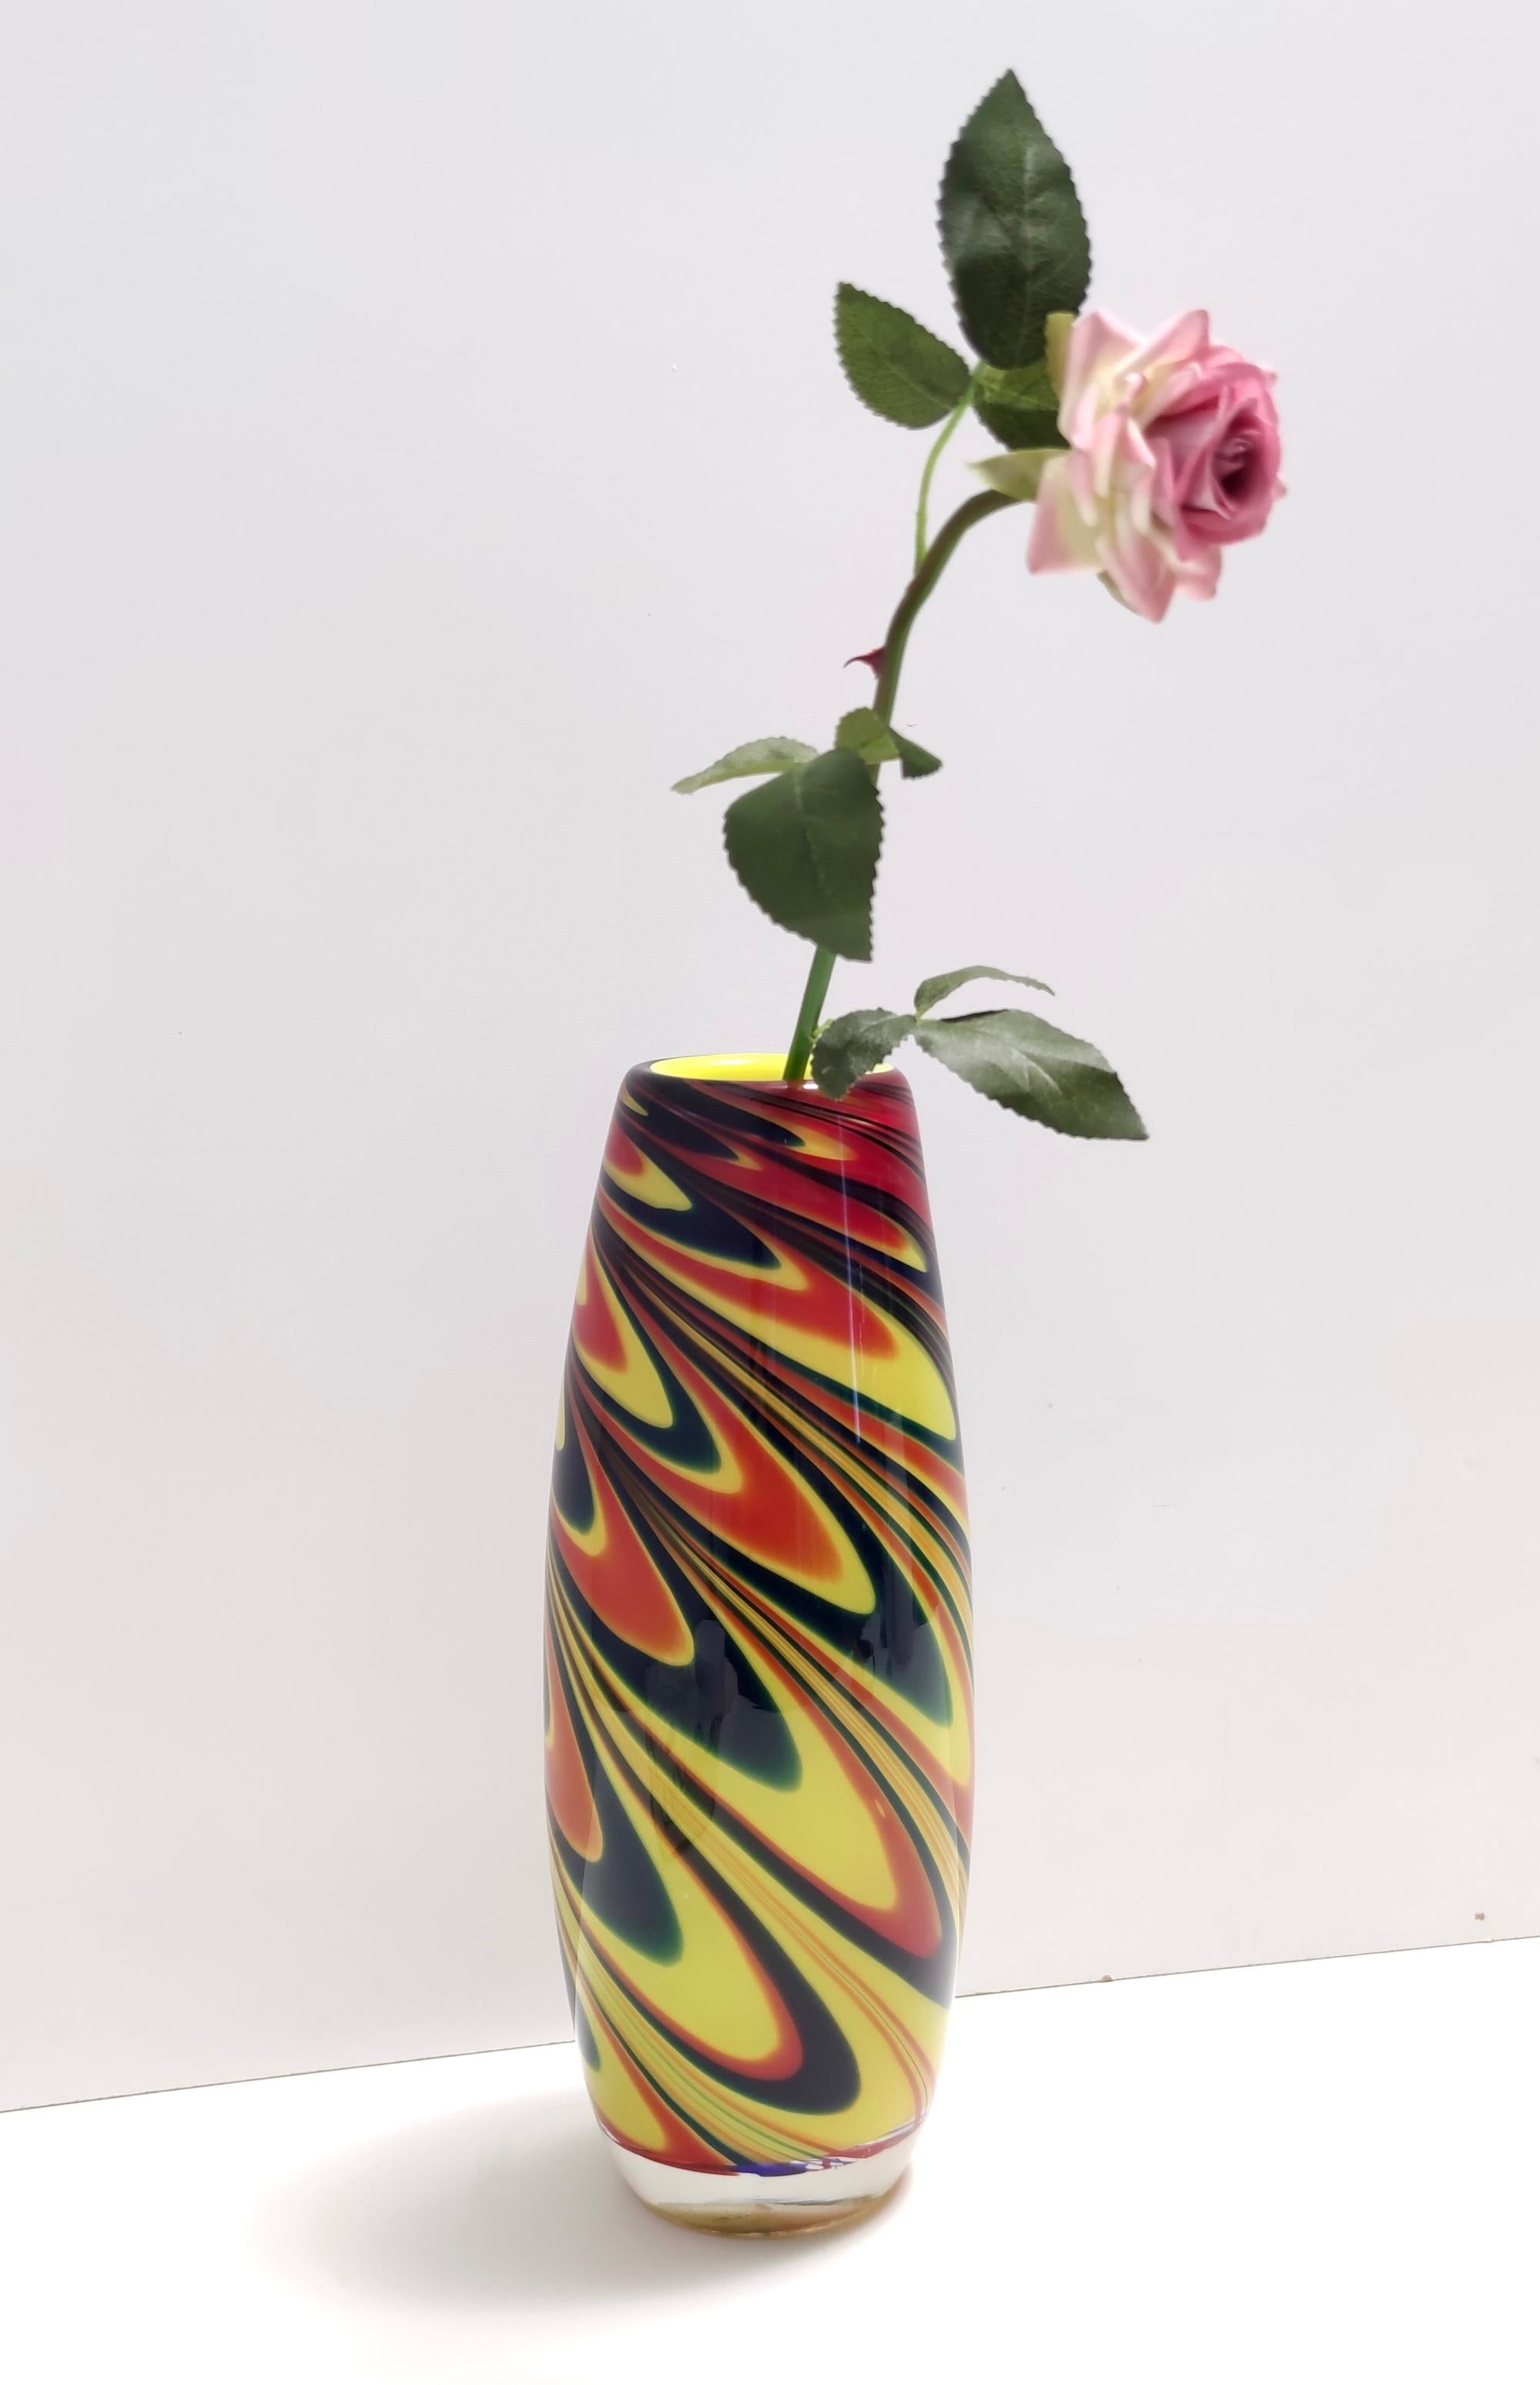 Made in Italy, 1980s.
It is made in encased and hand-blown Murano glass.
With its original label. 
This vase is vintage, therefore it might show slight traces of use, but it can be considered as in perfect original condition.

Measures:
Diameter 12